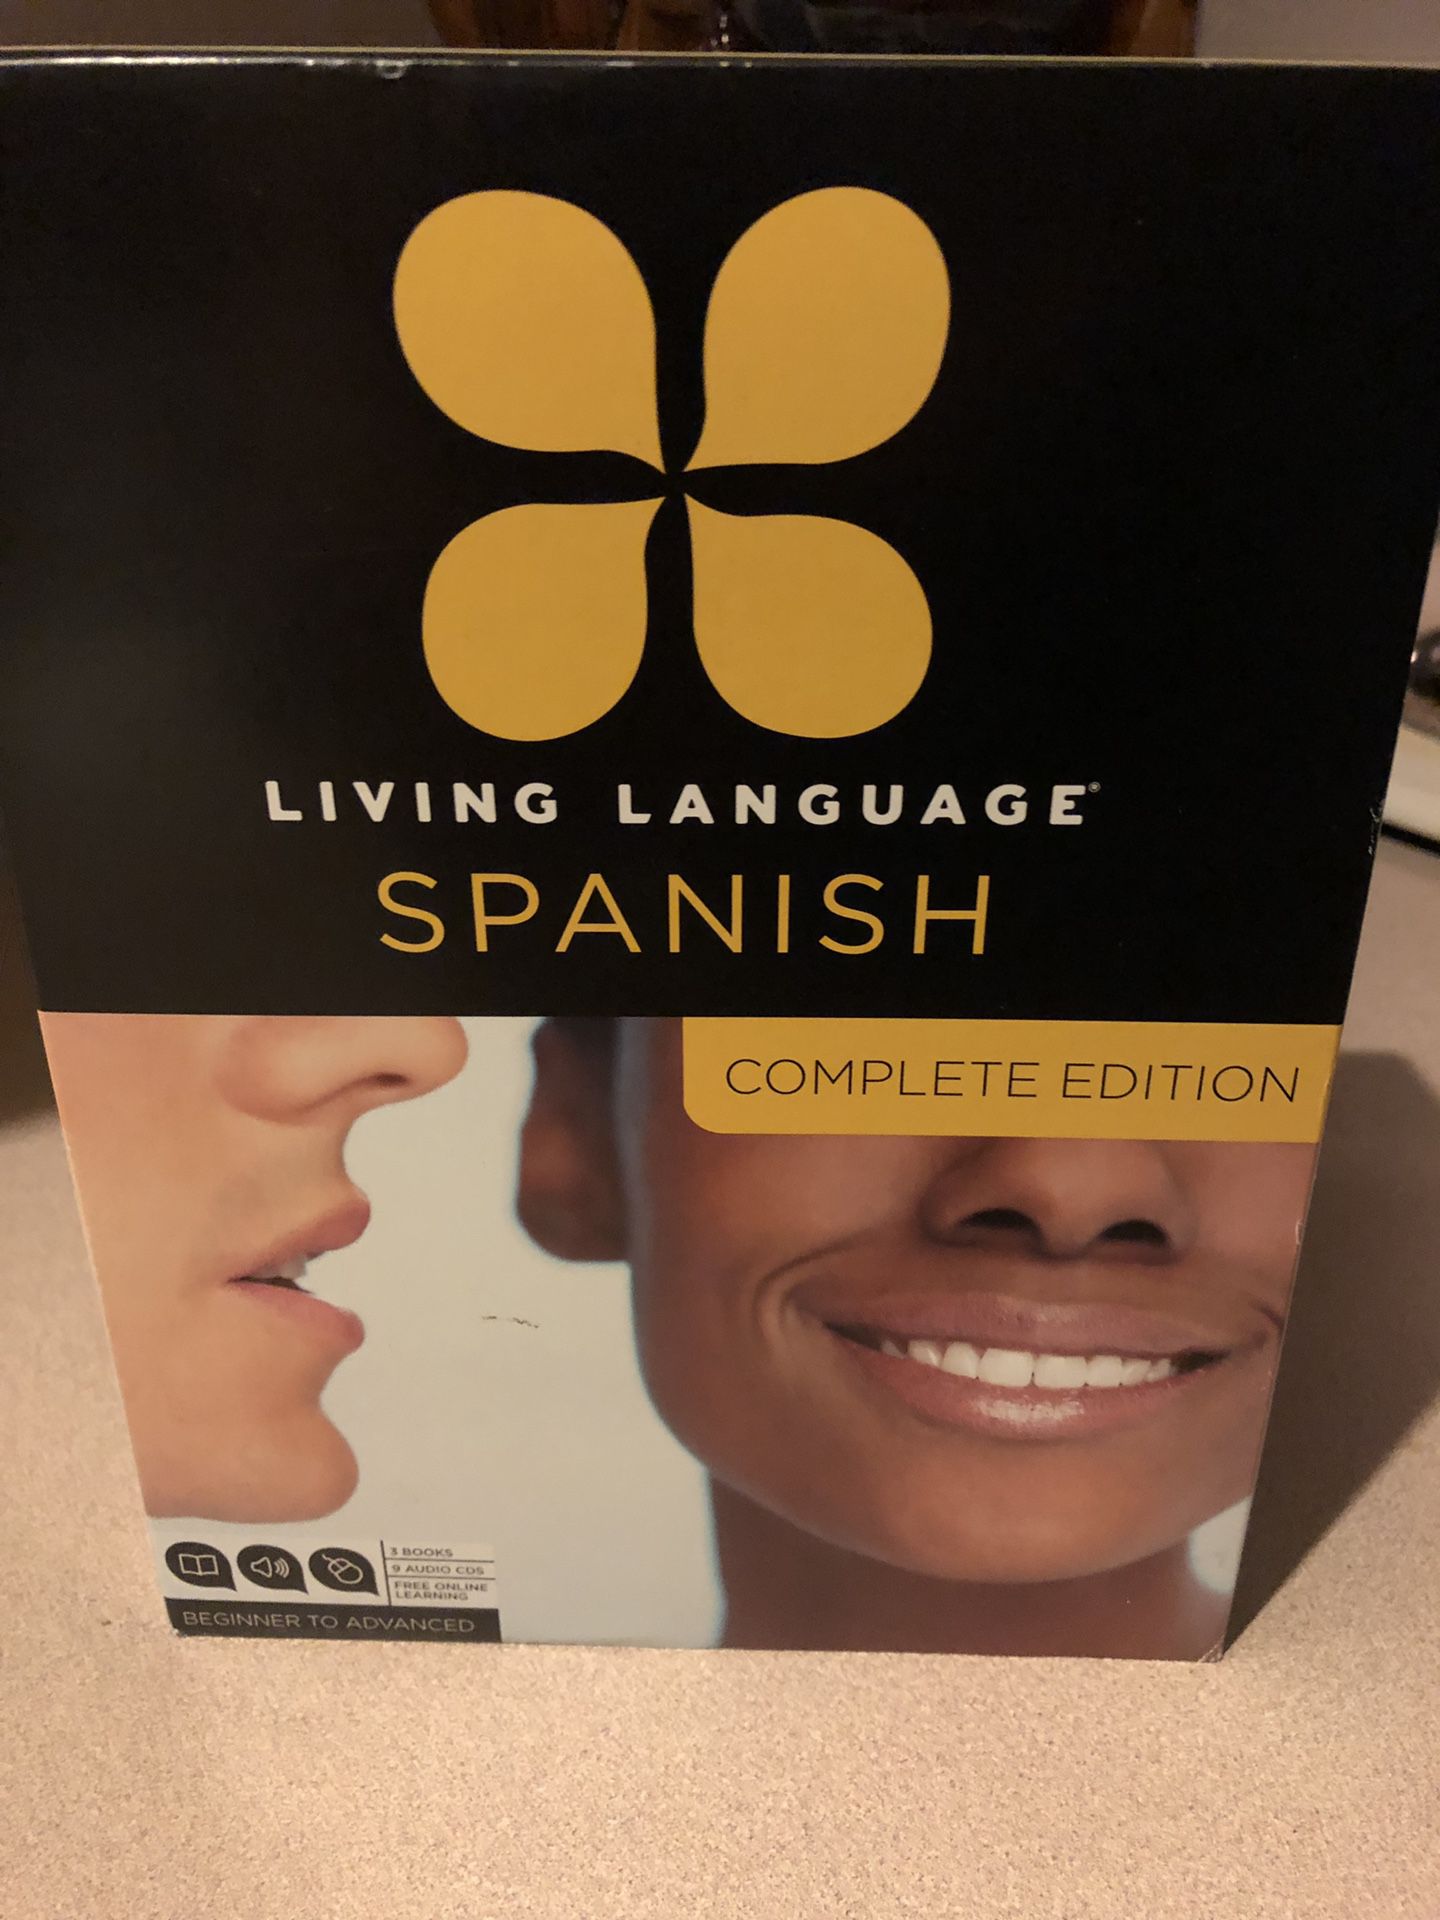 Learning Spanish books and discs